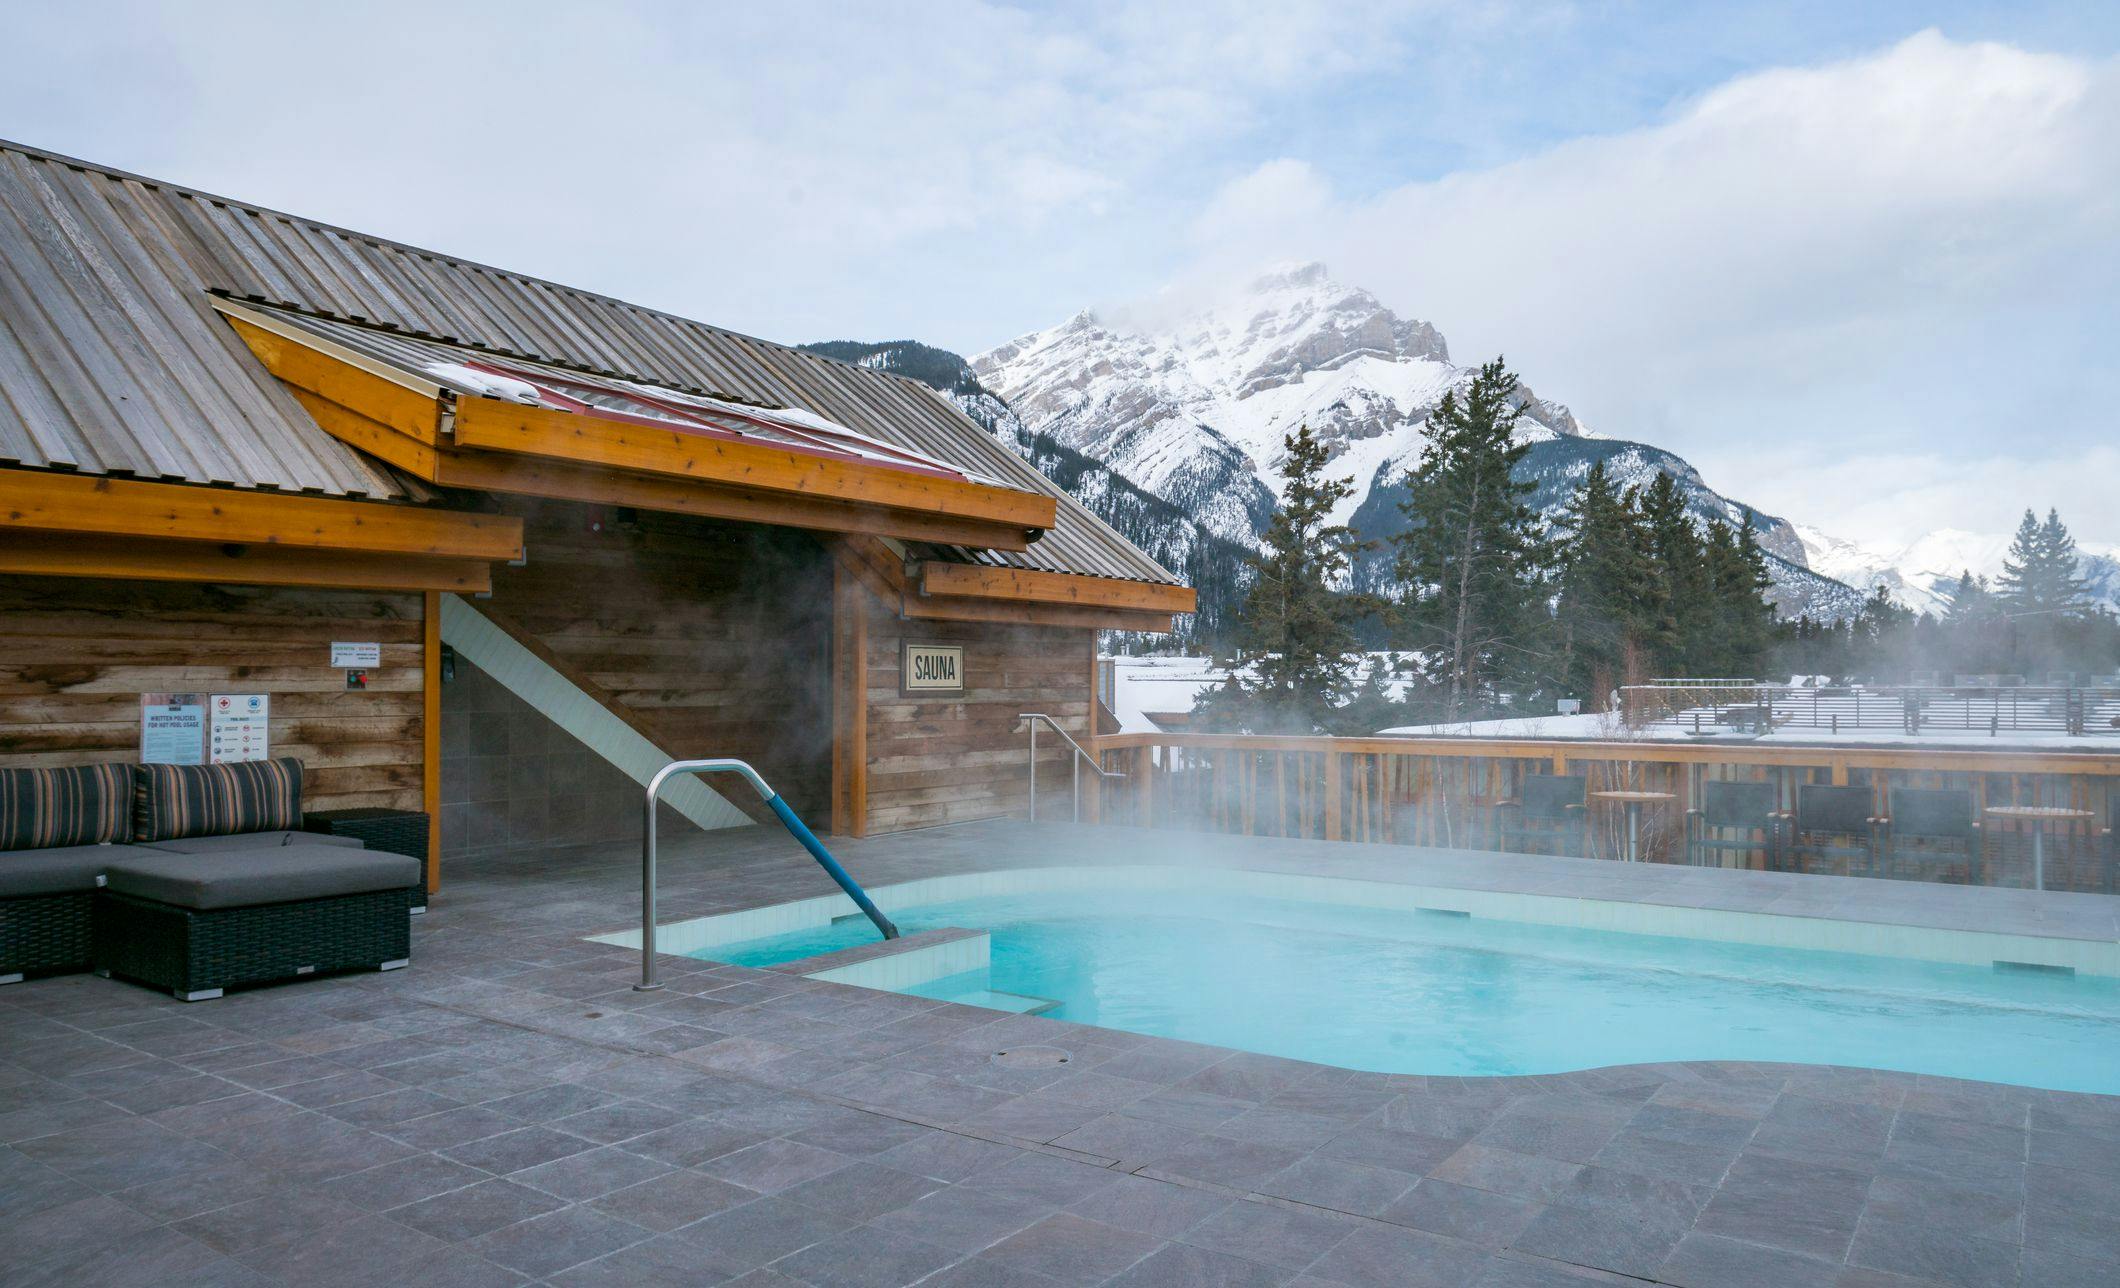 Rooftop Hot Tub &amp; Lounge Area with Snow-Capped Mountain Peak in the Background